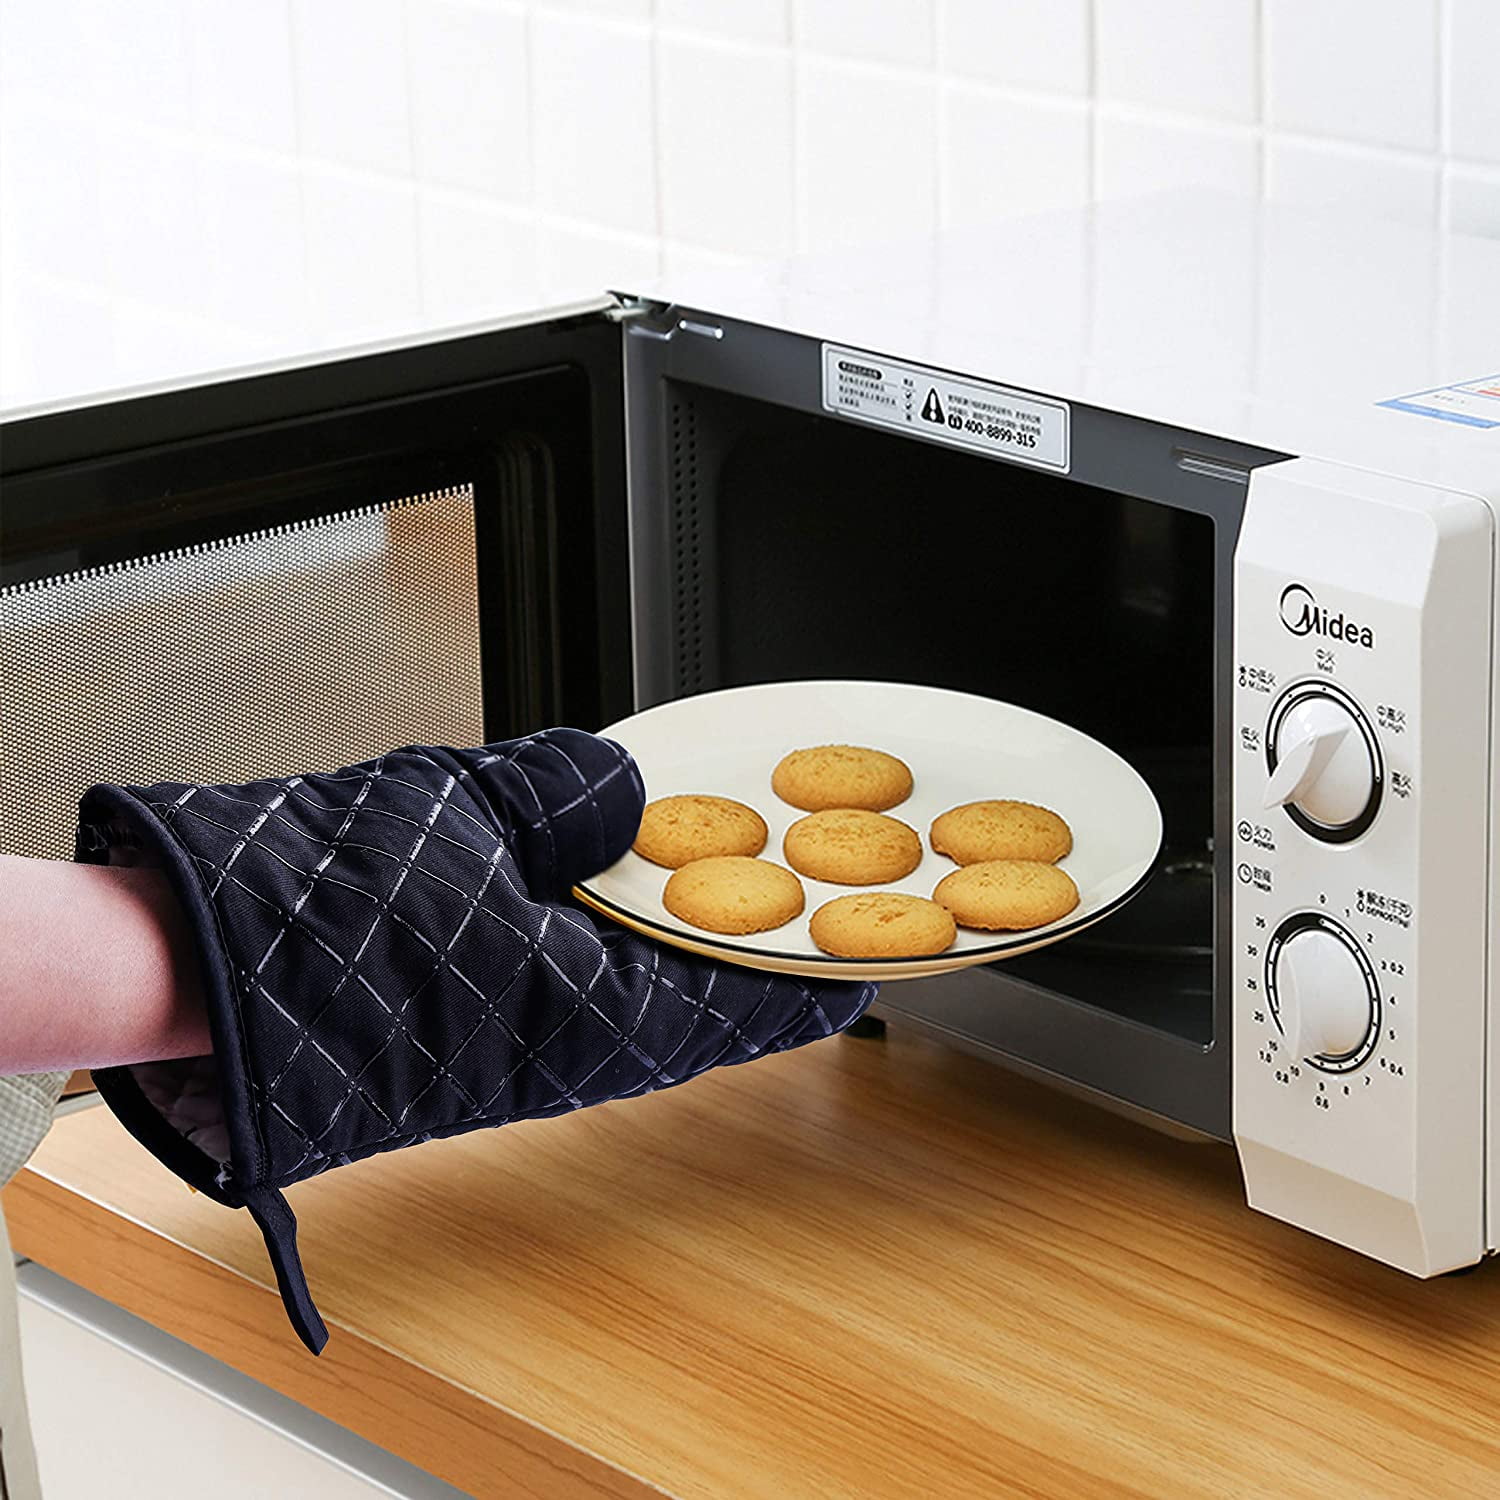 Choice 15 Flame Retardant Oven Mitts and Waffle-Weave Kitchen